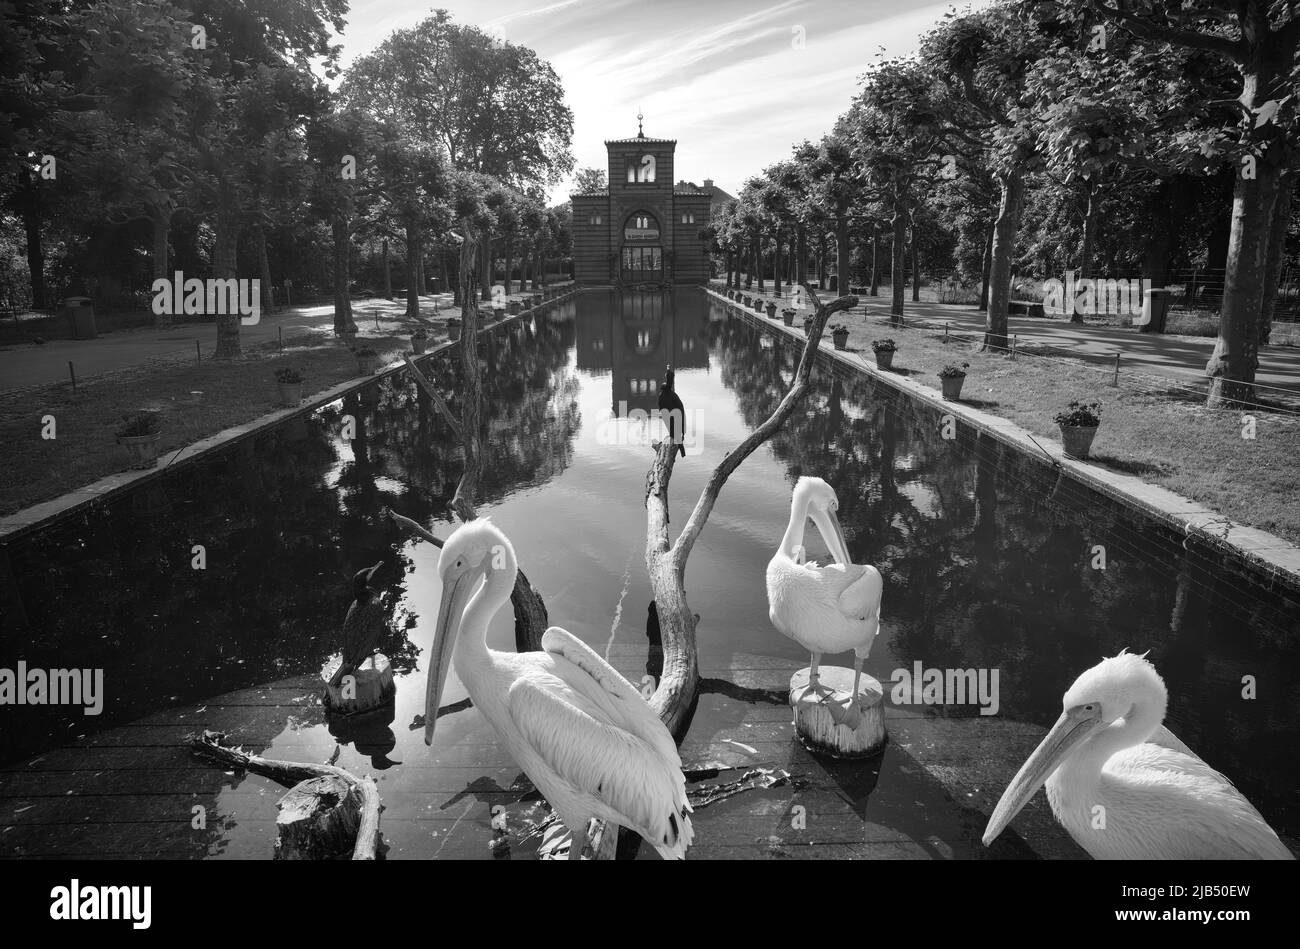 Great white pelicans (Pelecanus onocrotalus), plumage care, in front of Damascene Hall in Moorish style, infrared image, Wiilhelma Stock Photo